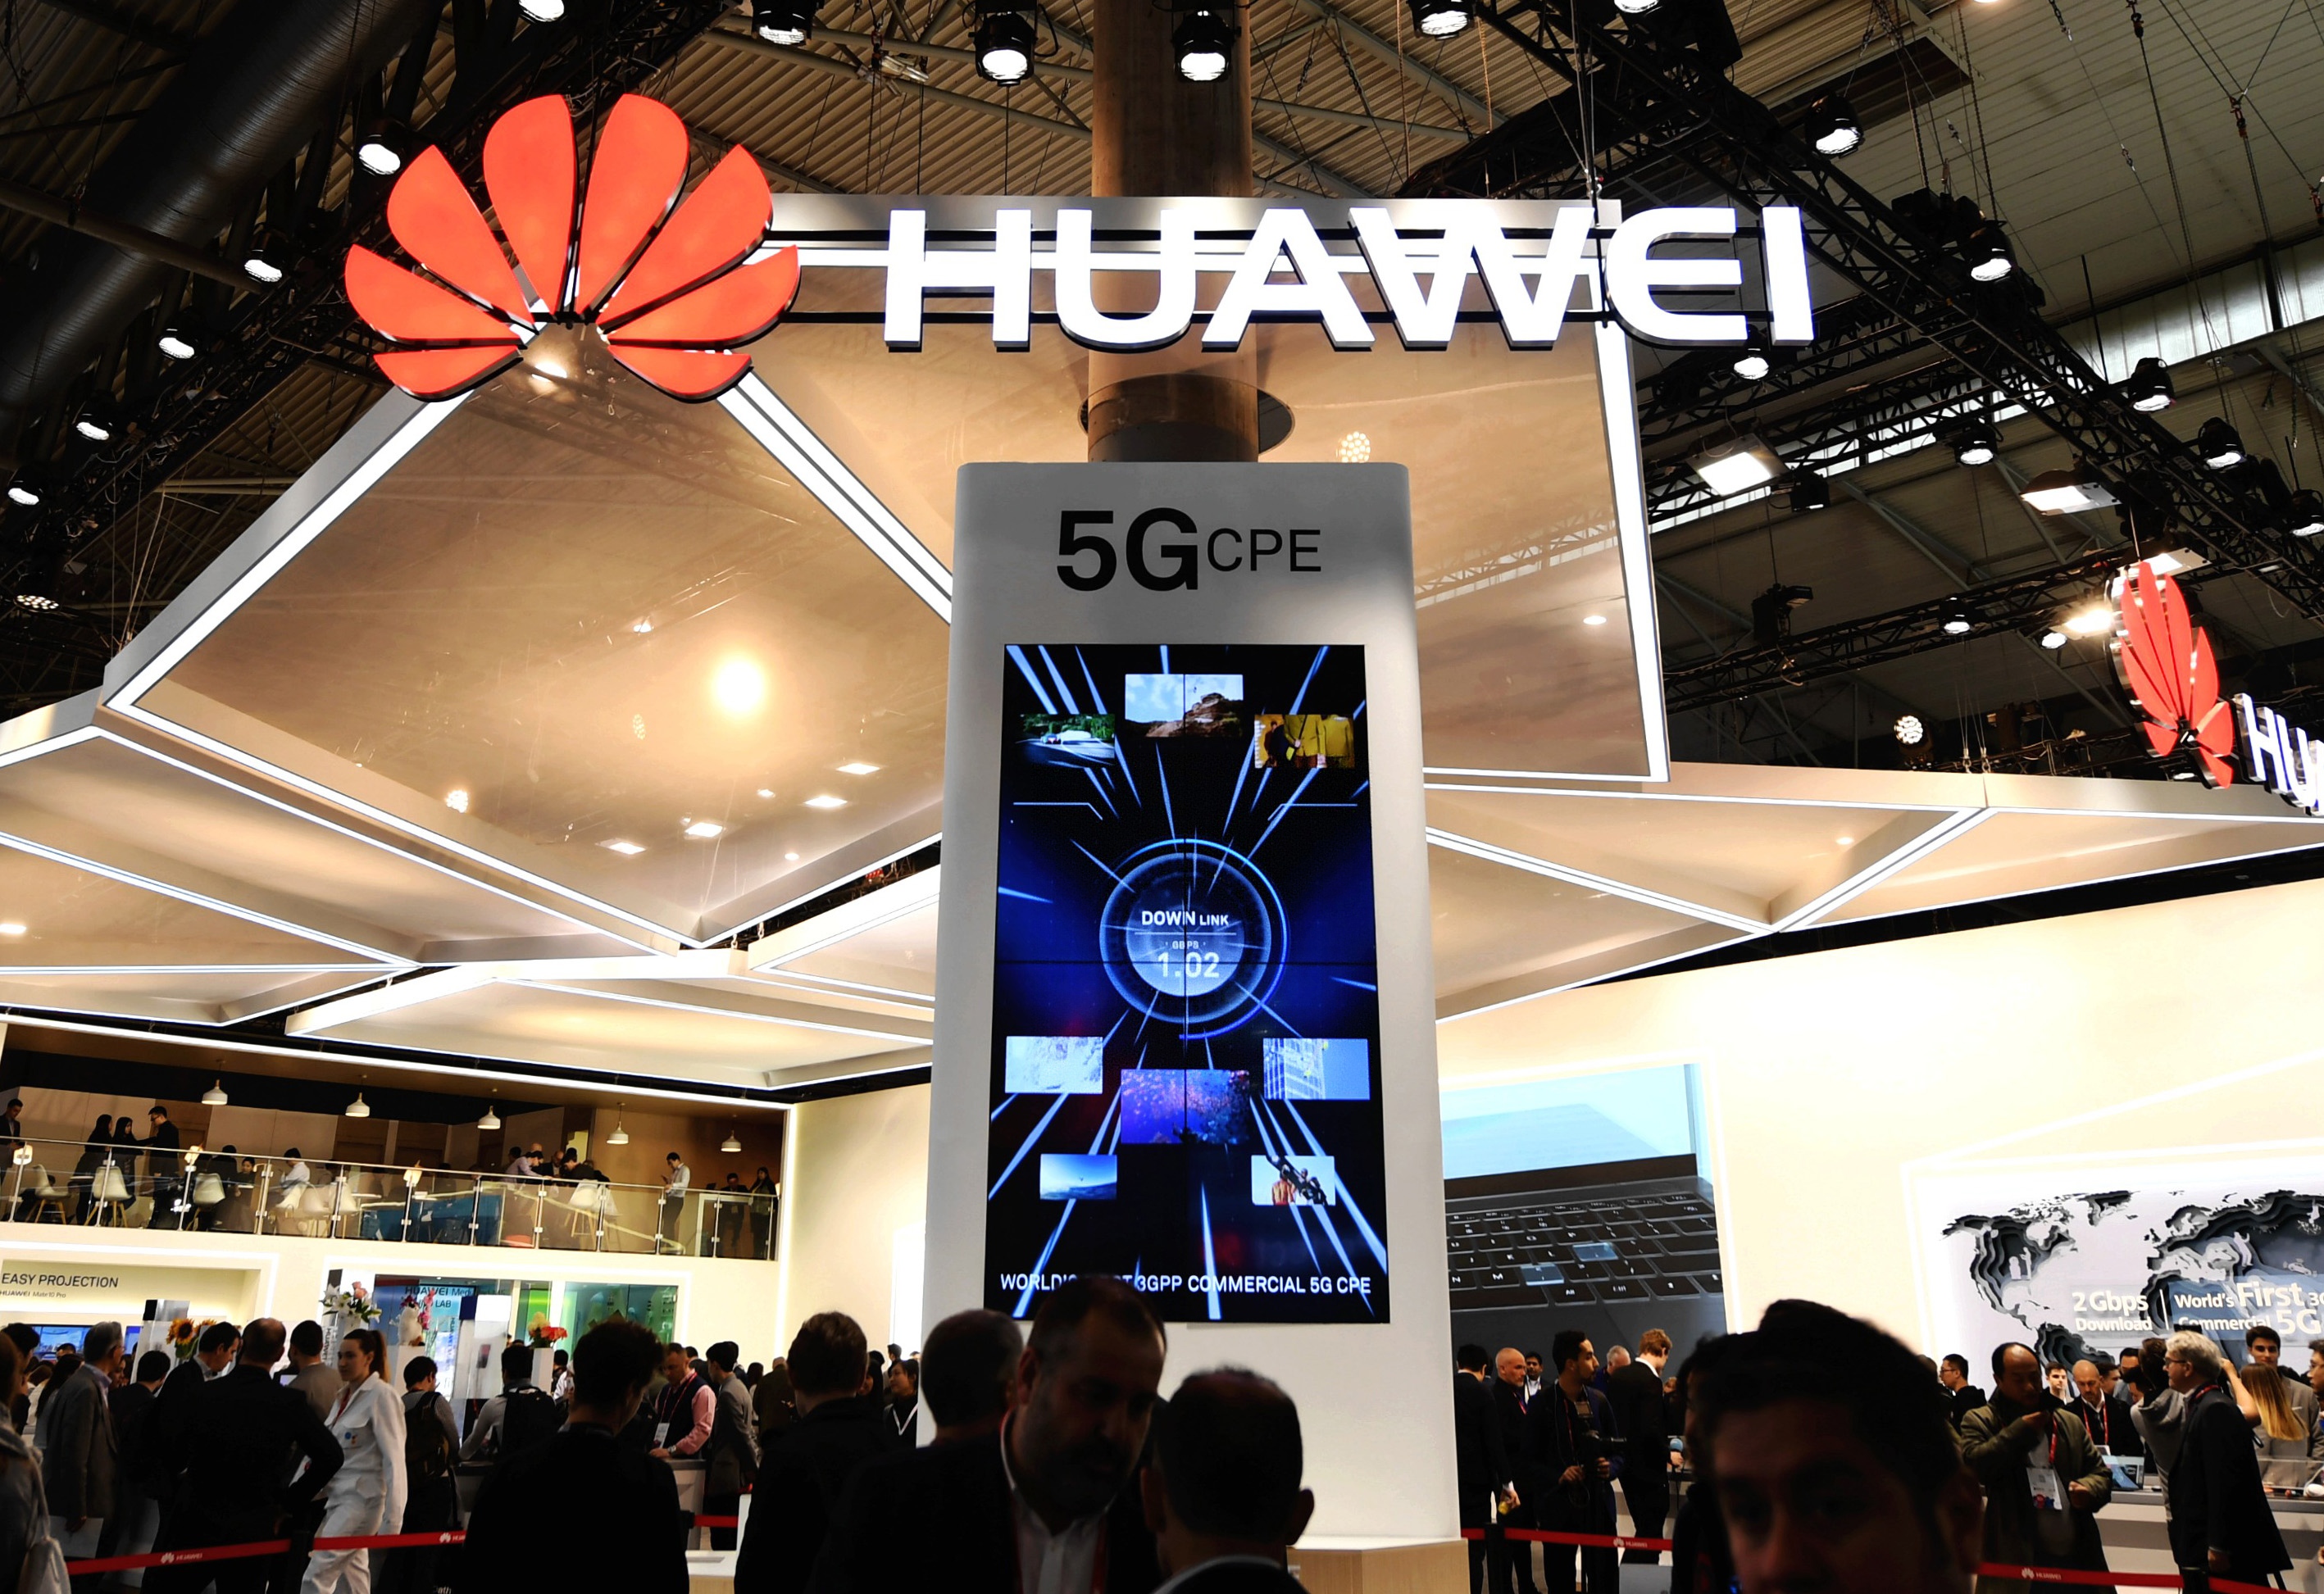 China's telecom giant Huawei displays 5G technology at the 2018 Mobile World Congress in Barcelona, Spain, February 26, 2018. /Xinhua